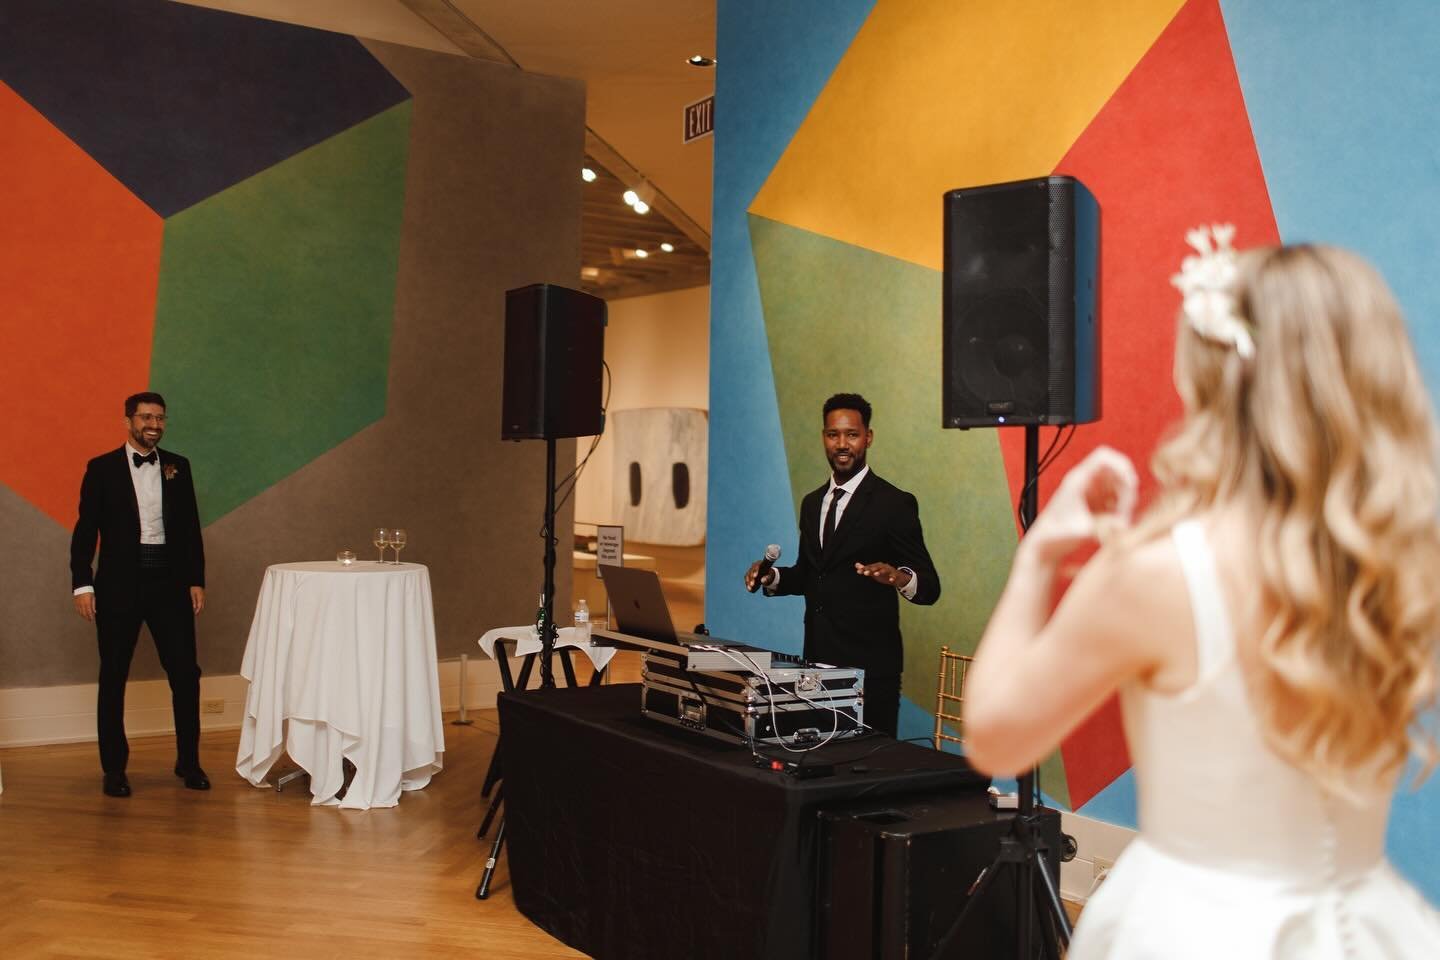 A black-tie wedding at the VMFA doesn&rsquo;t mean you won&rsquo;t be tearing up the dance floor with your guests. @massfxmusic will make sure of that 😉 

_______________________________

@valerie.demo 
@thehiveweddingco 
@vmfa_special_events 
@rolw